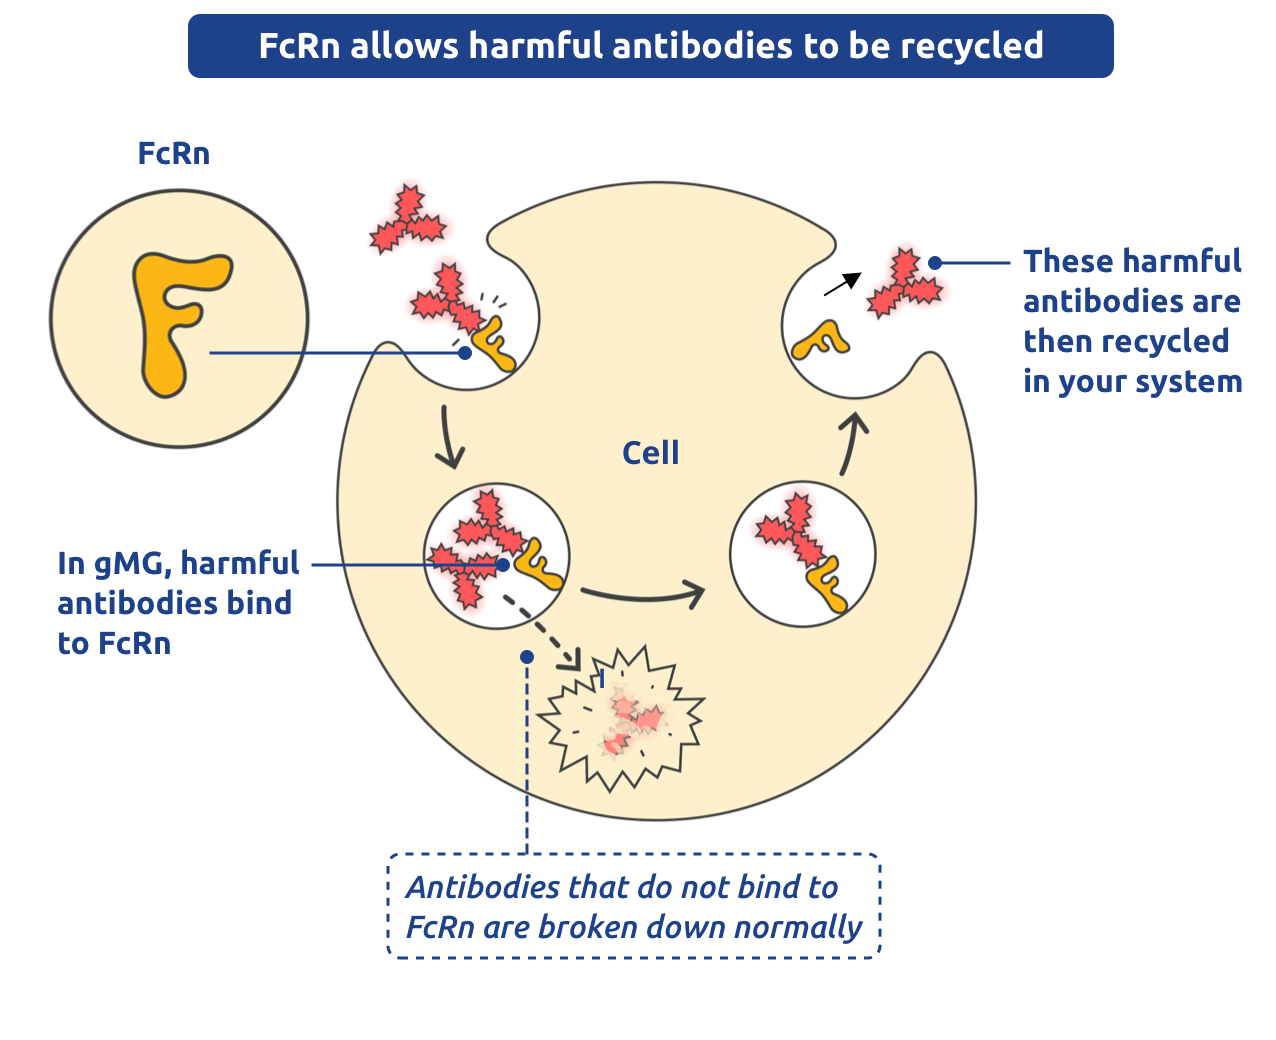 FcRN allows harmful antibodies to be recycled.